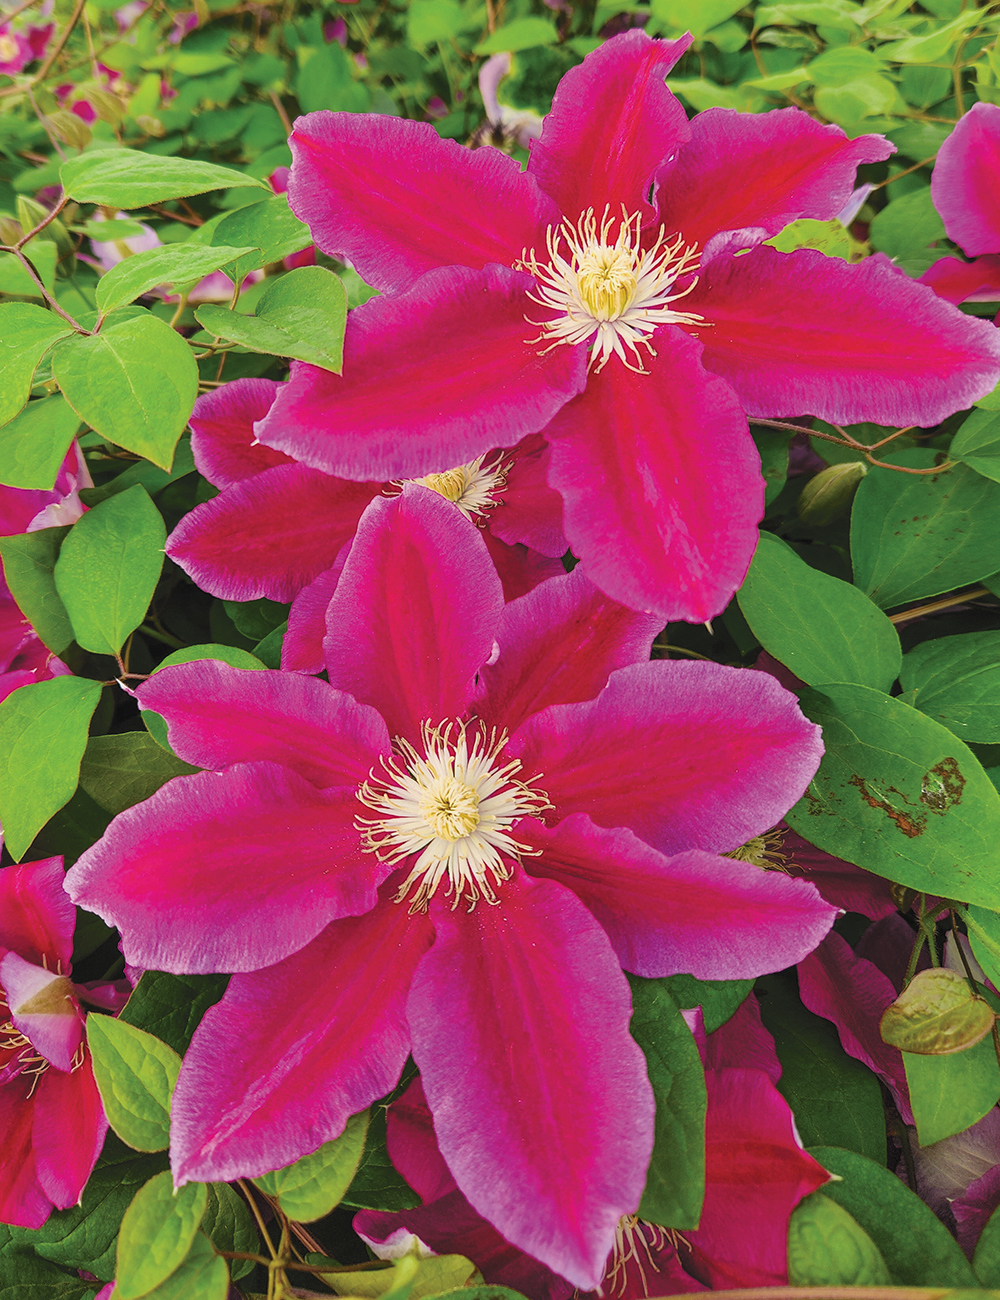 Clematis Fireworks Live Plant In A Inch Growers Pot Clematis 'Fireworks'  Starter Plants Ready For The Garden Beautiful Deep Pink And Purple